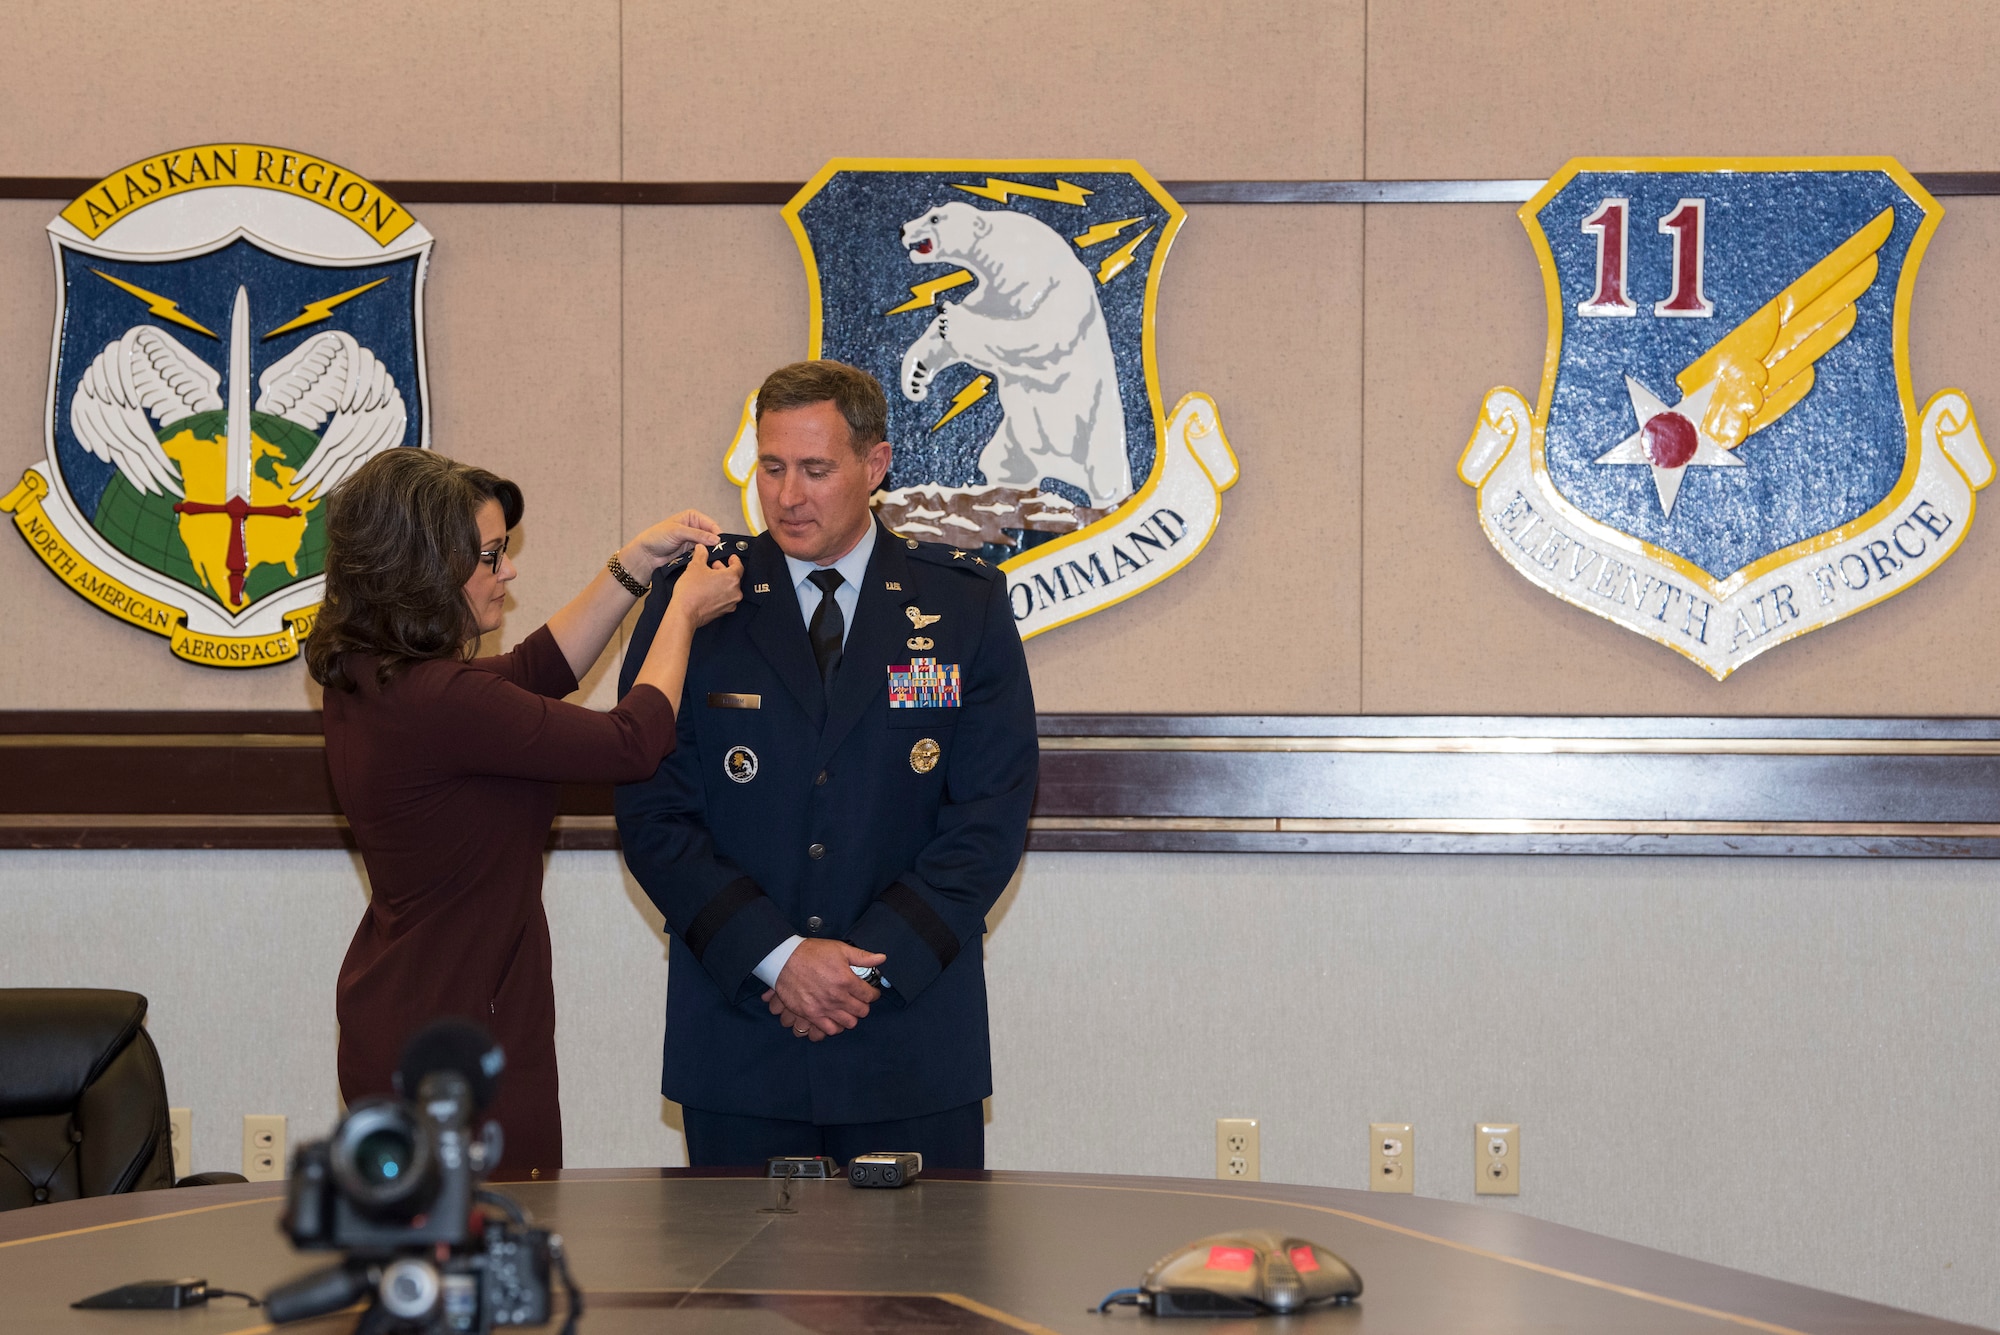 New rank is pinned on U.S. Air Force Lt. Gen. David A. Krumm by his wife, Lisa, during his promotion ceremony April 20, 2020, at Joint Base Elmendorf-Richardson, Alaska. Krumm’s promotion places him as the senior military officer in Alaska, responsible for the integration of all military activities in the Alaskan joint operations area, synchronizing mission operations for more than 21,000 active-duty and reserve forces from all services.